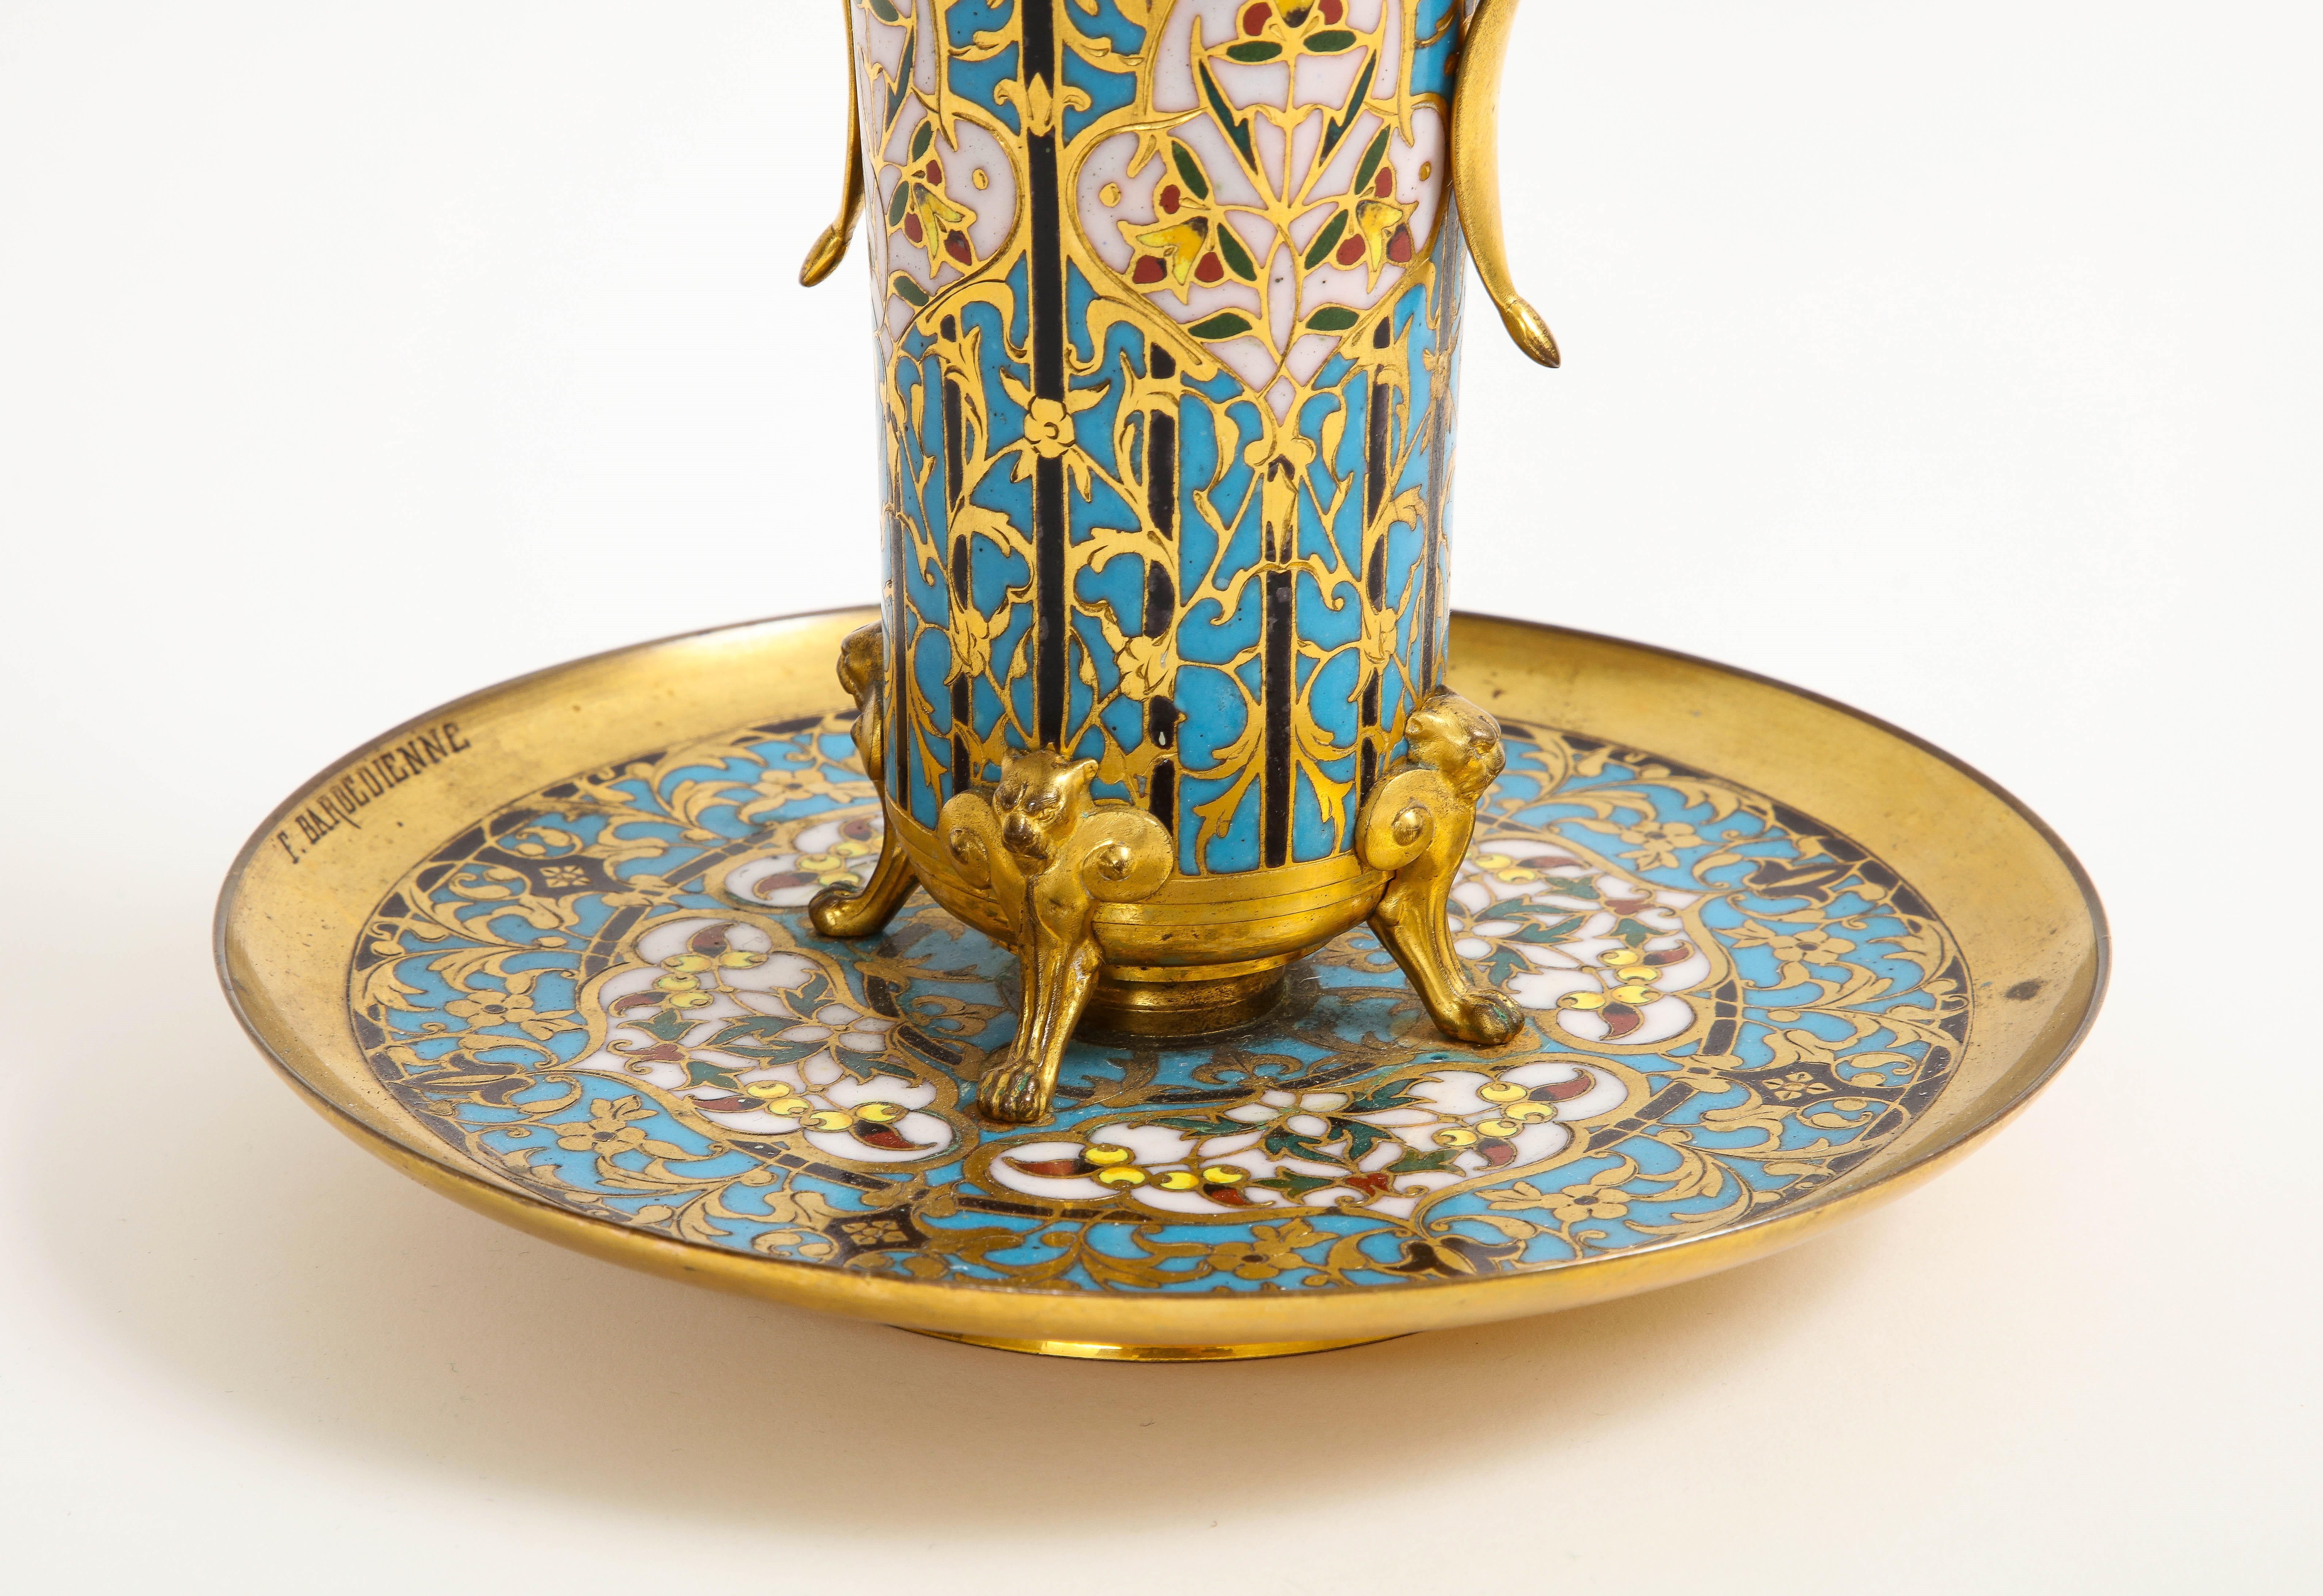 Bronze 19th C. French Islamic Champleve Enamel Vase and Underplate, Signed Barbedienne For Sale